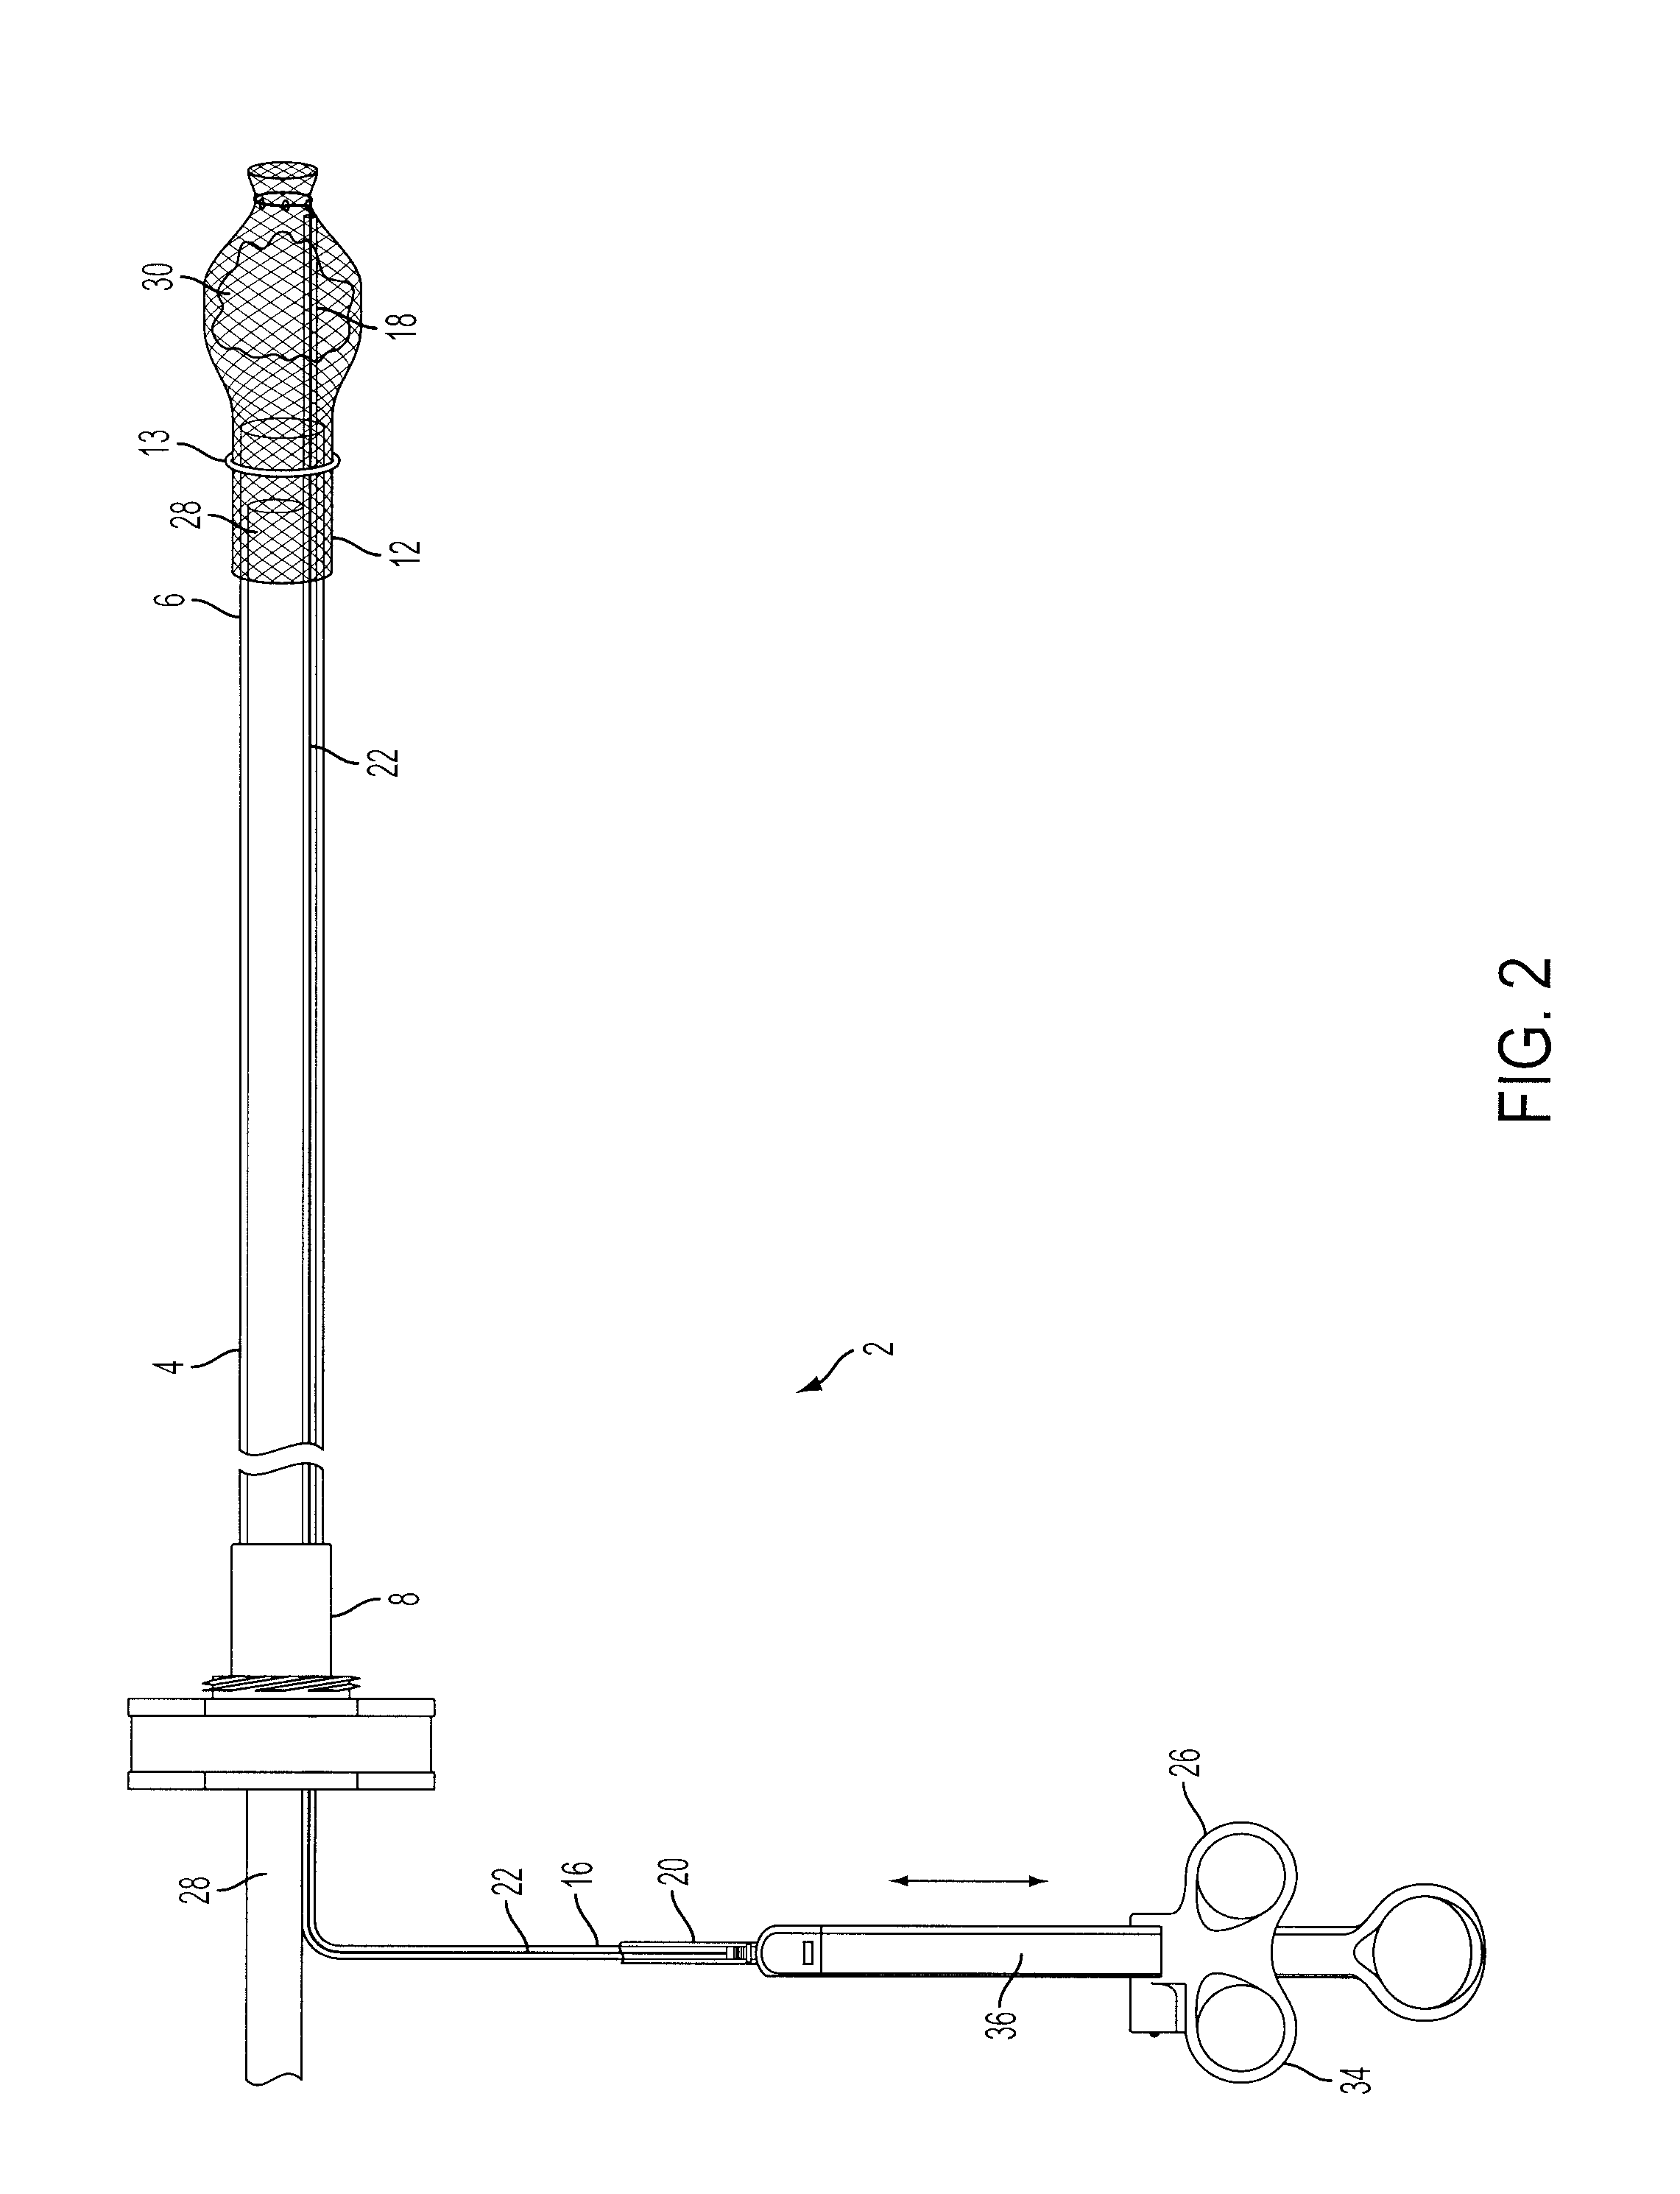 Apparatus and method for removal of foreign matter from a patient